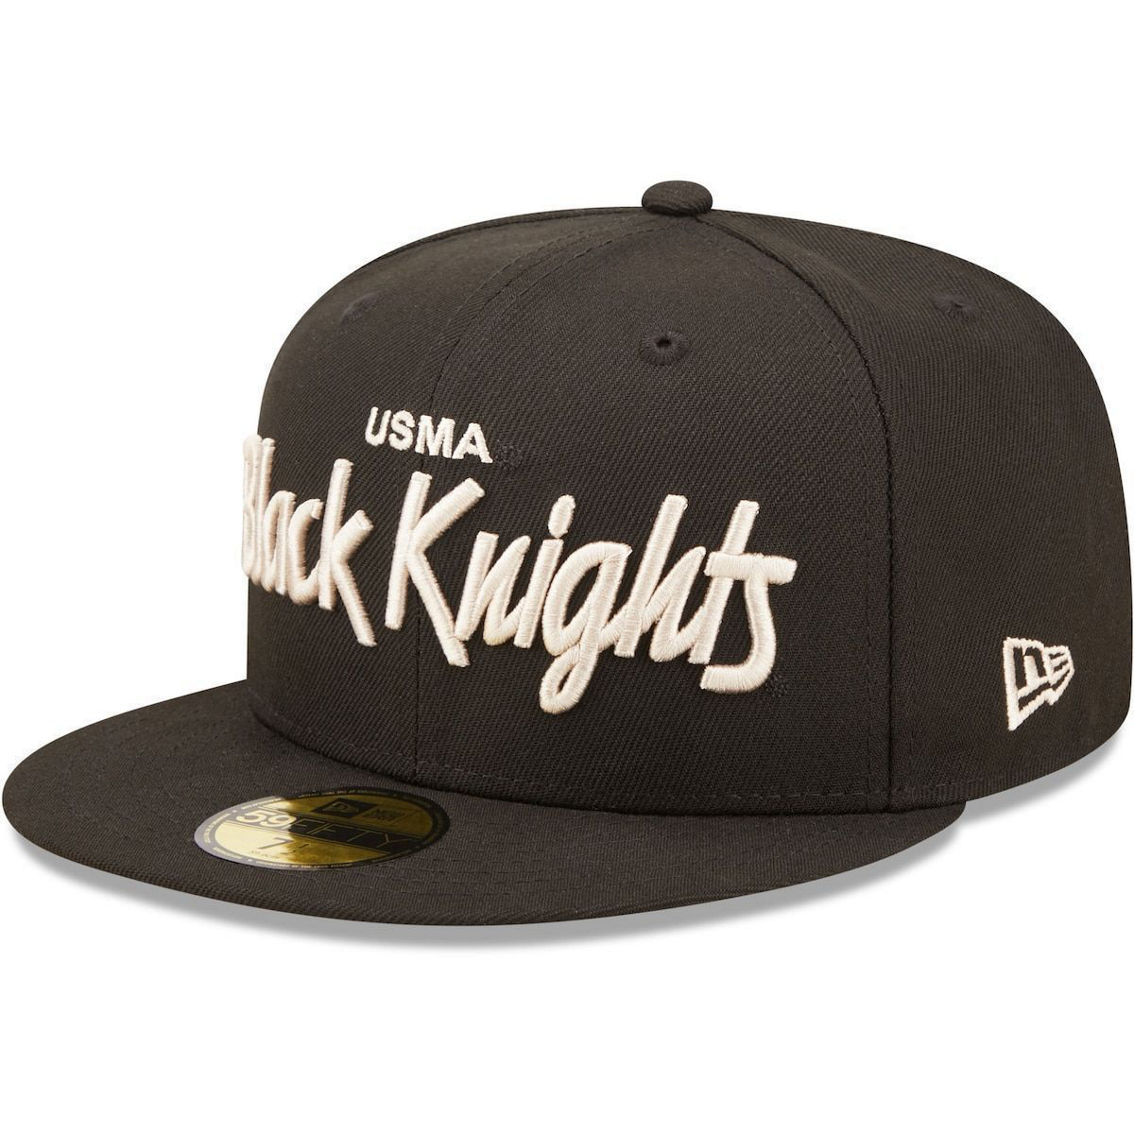 New Era Men's Black Army Black Knights Script Original 59FIFTY Fitted Hat - Image 2 of 4